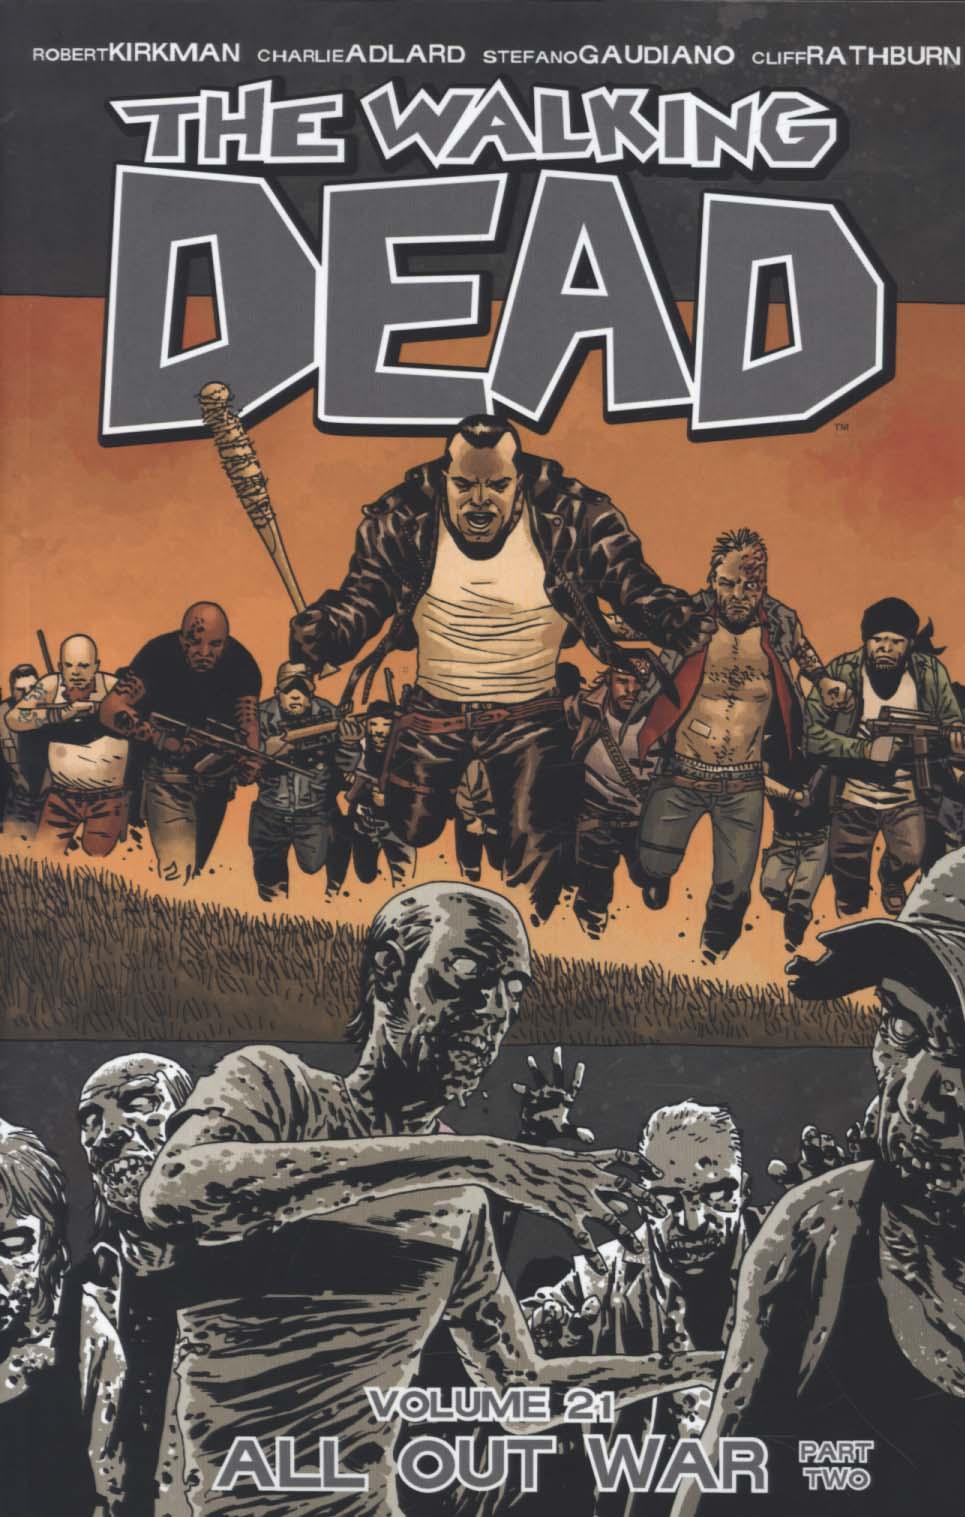 Walking Dead Volume 21: All Out War Part 2 - Stefano Gaudiano